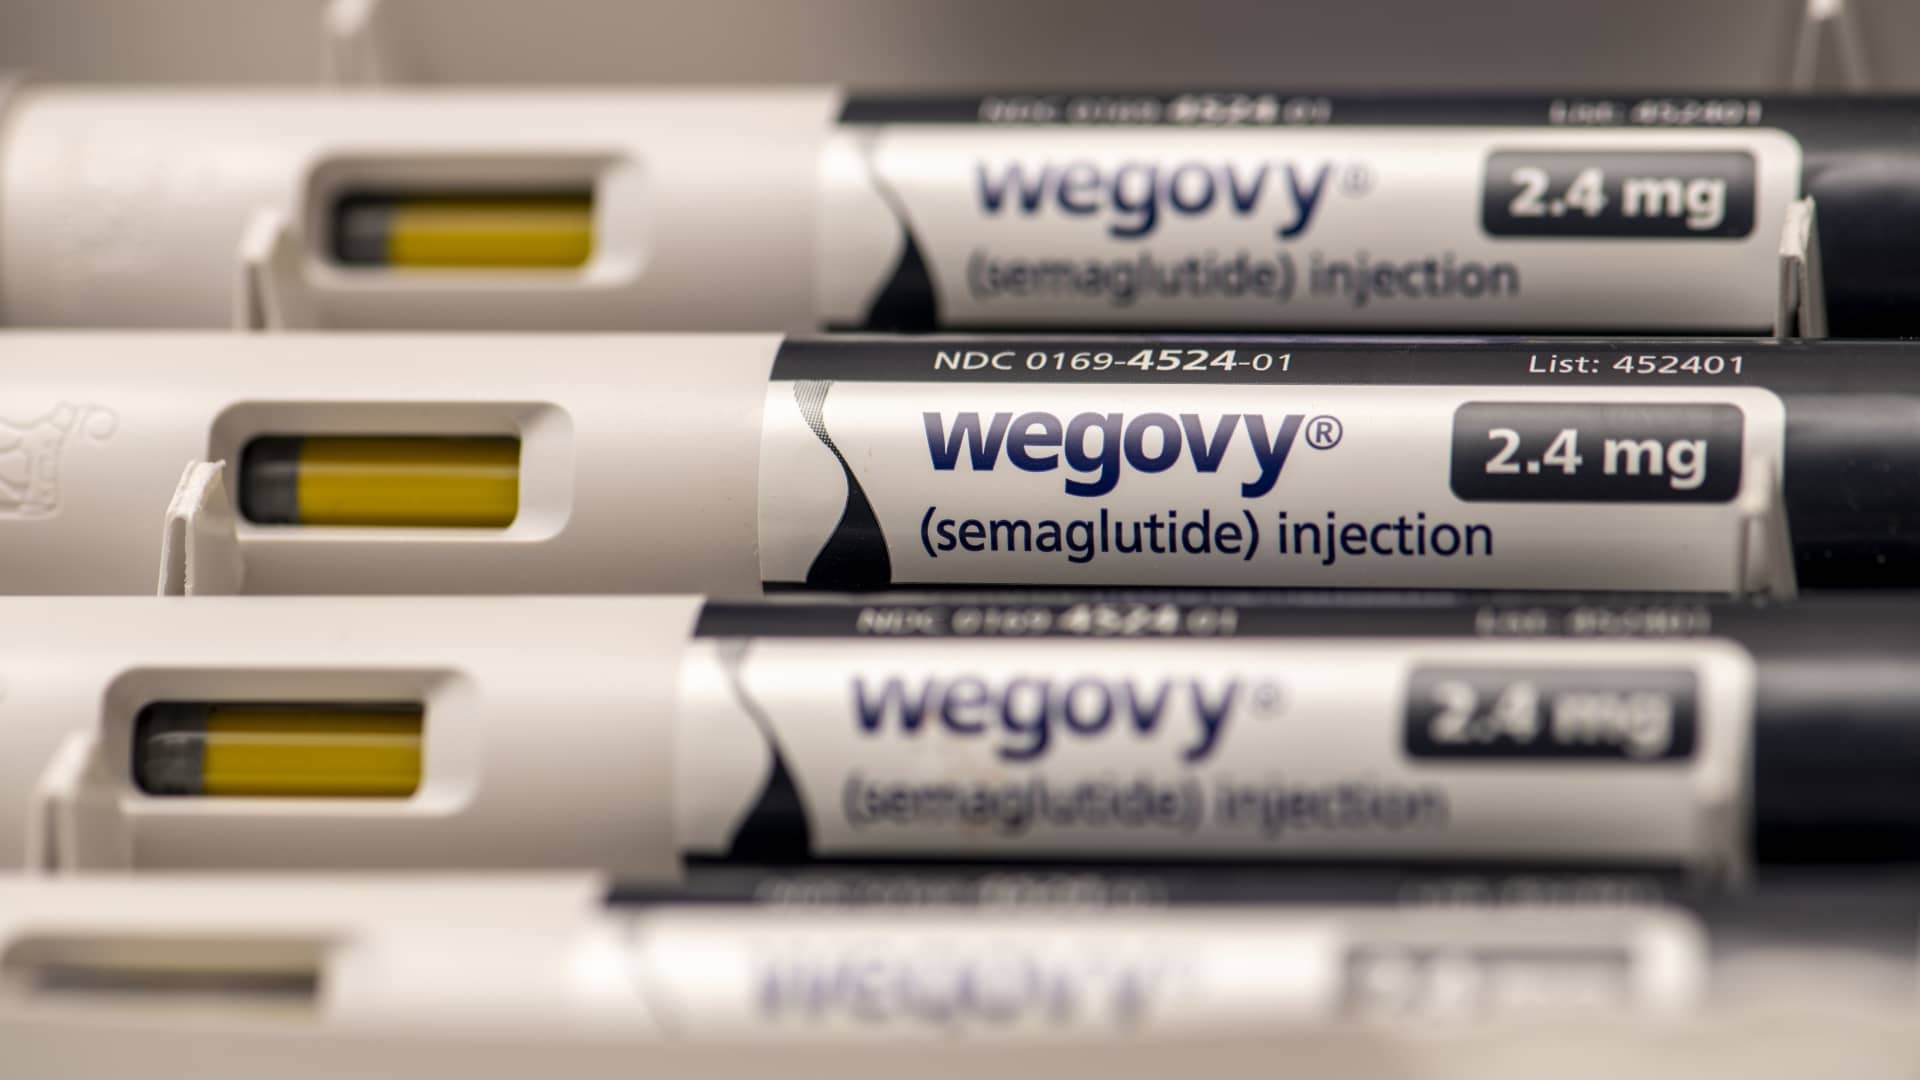 Weight loss drugs Wegovy, Ozempic may be linked to stomach paralysis